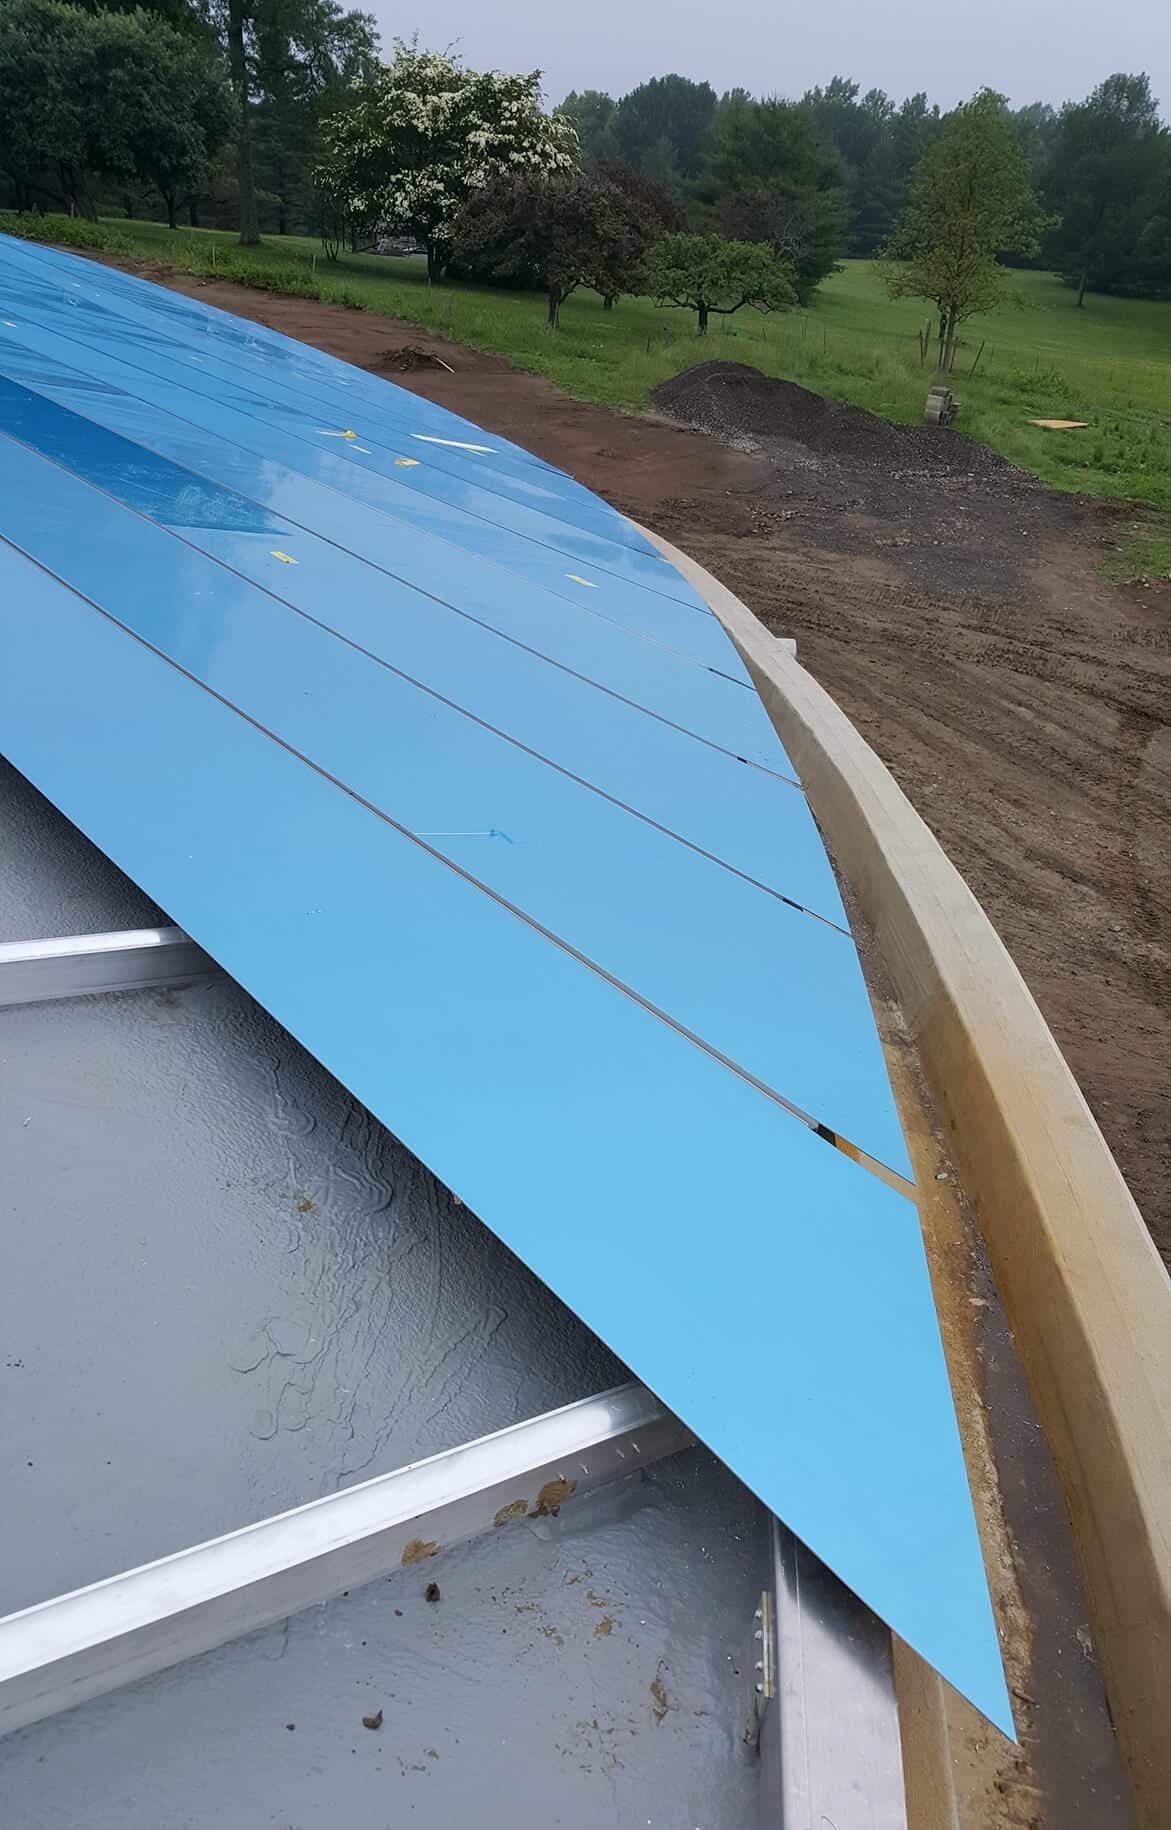 Details of the Grace Farms roof system during construction